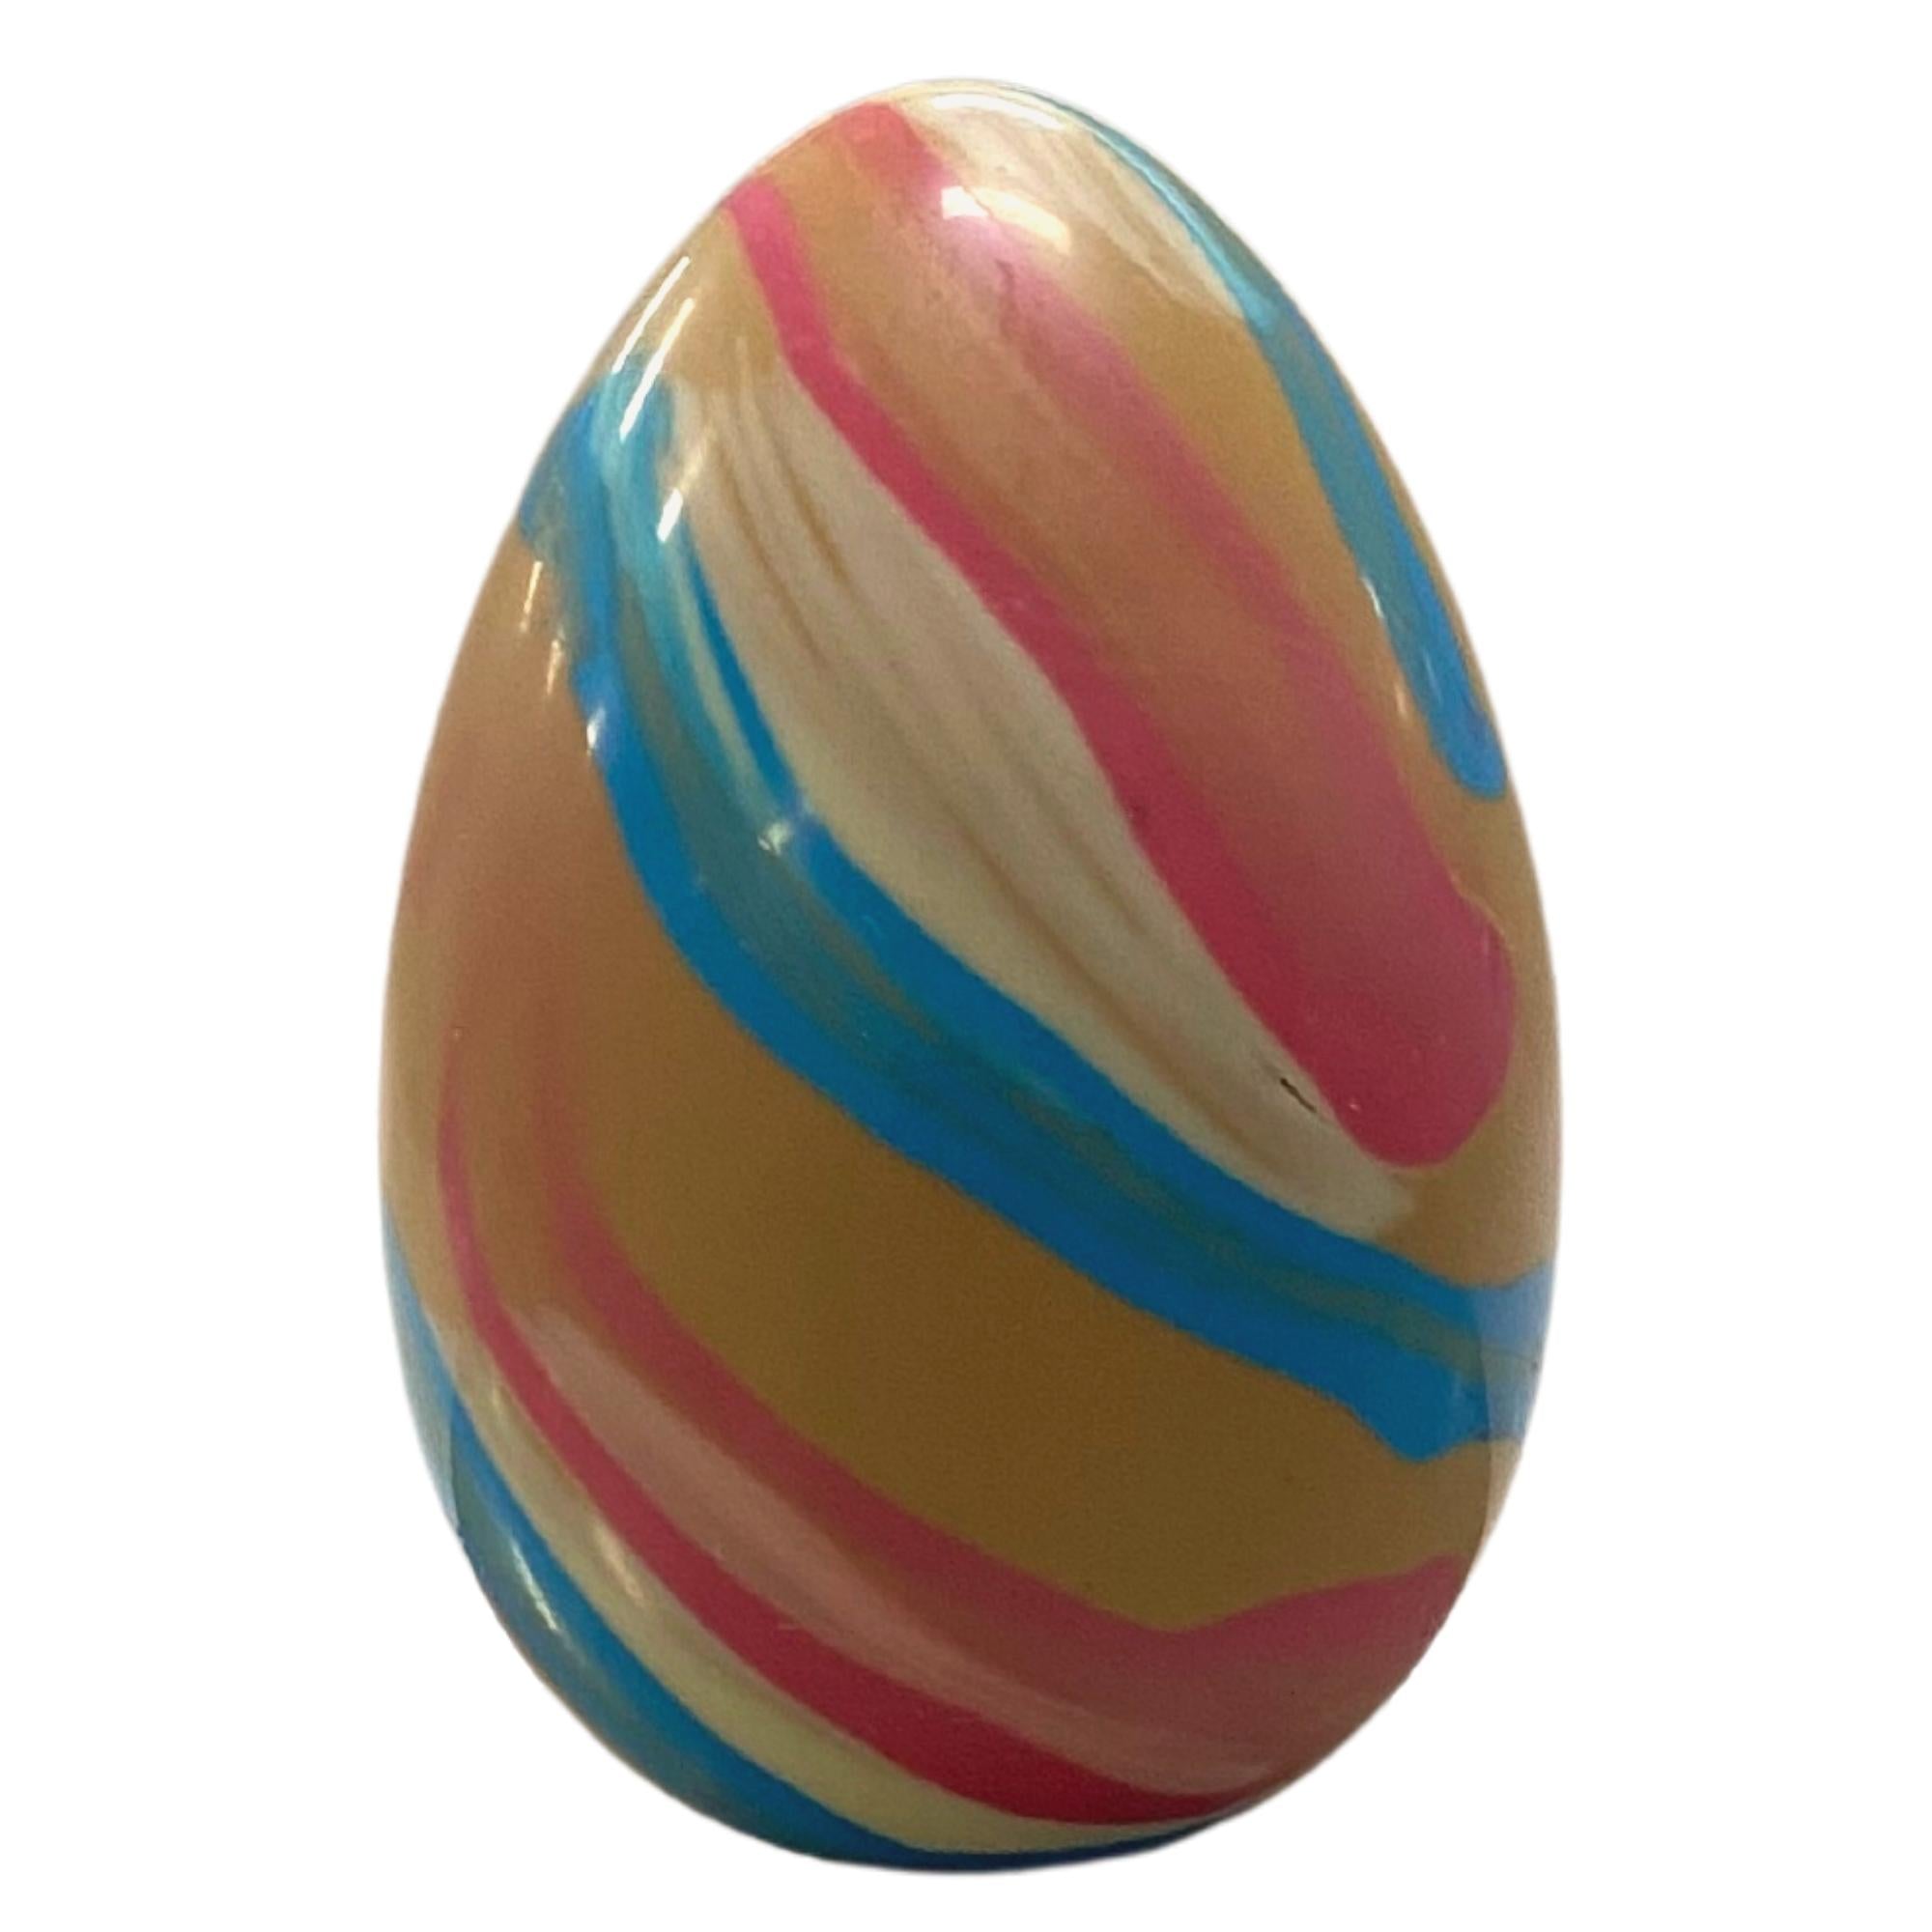 Deluxe Brushed Caramel Chocolate Easter Egg